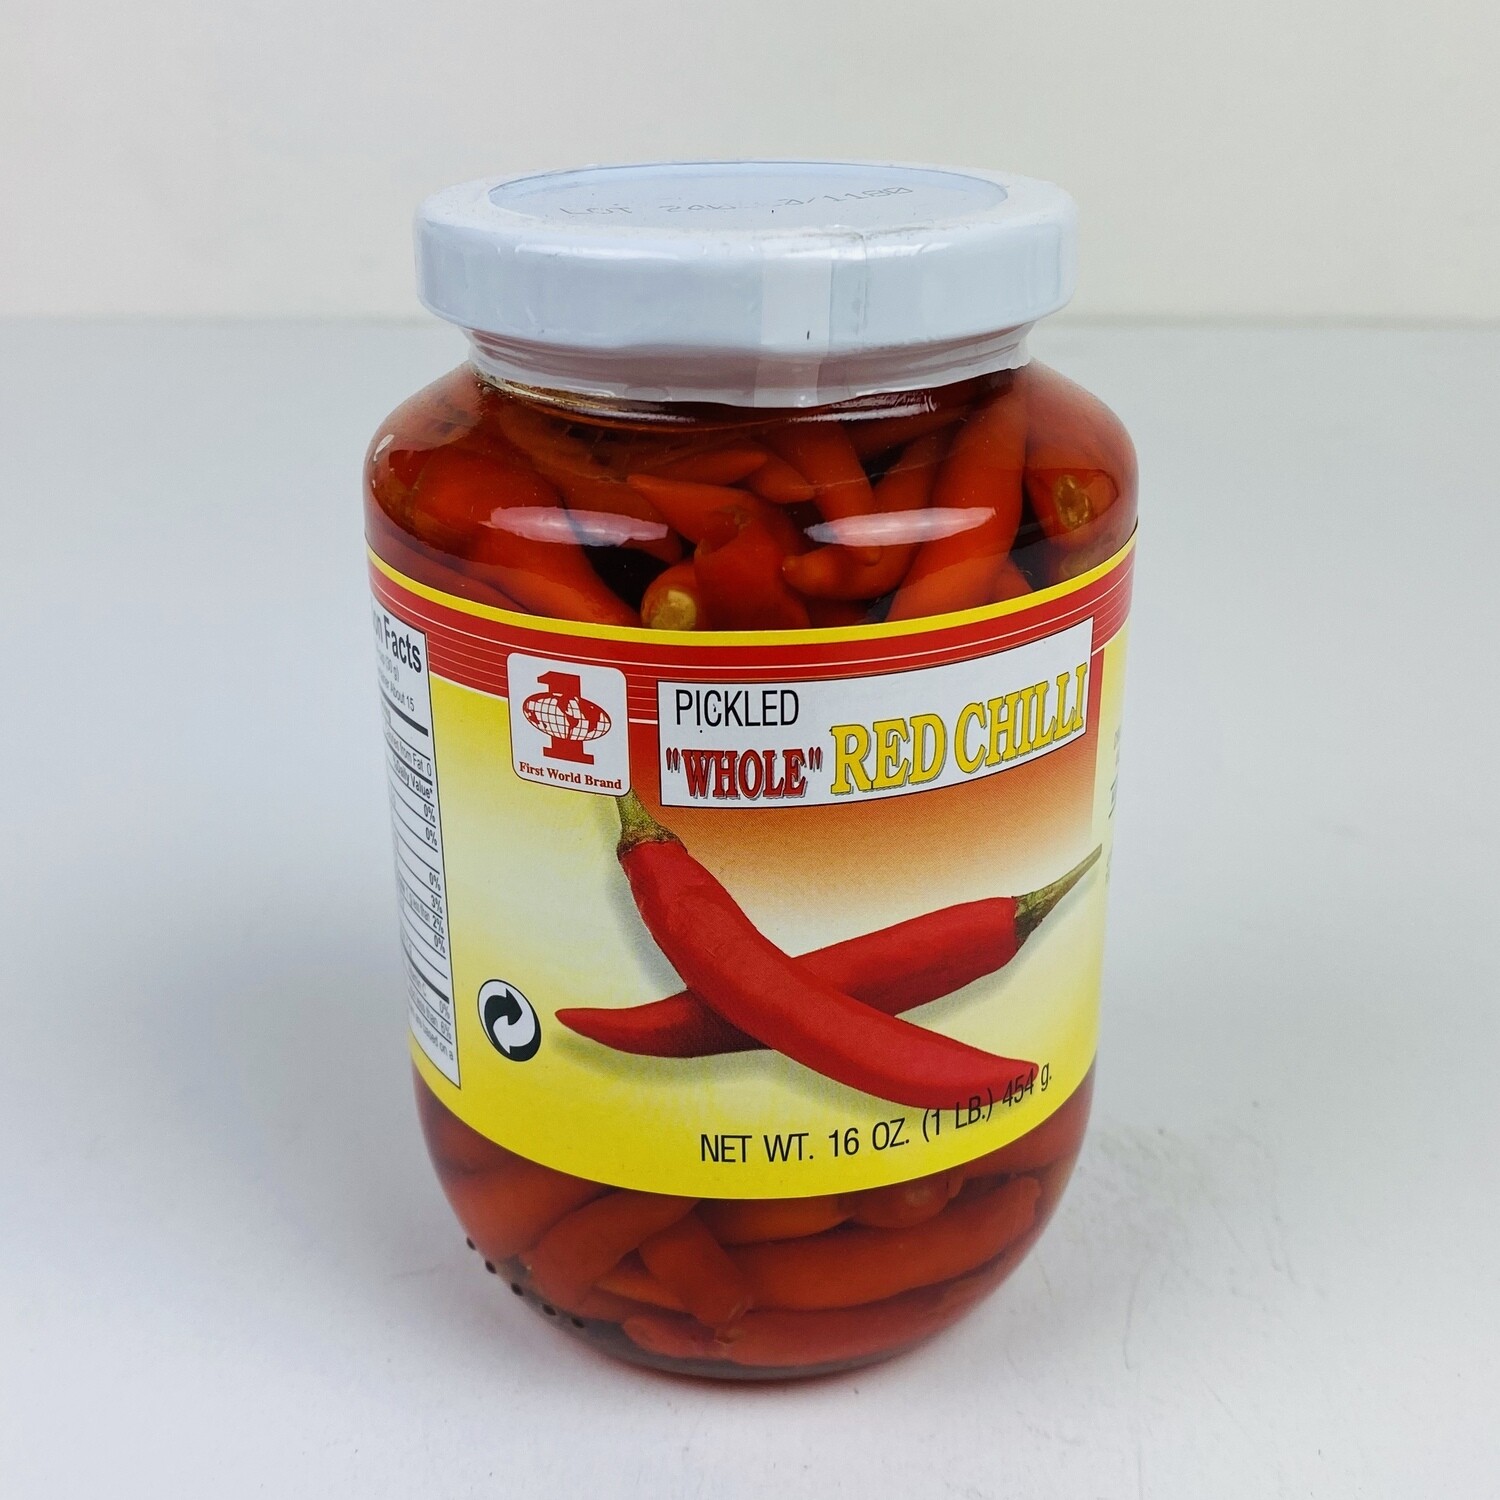 Red Whole Pickle Chili 腌红辣椒 一瓶16oz